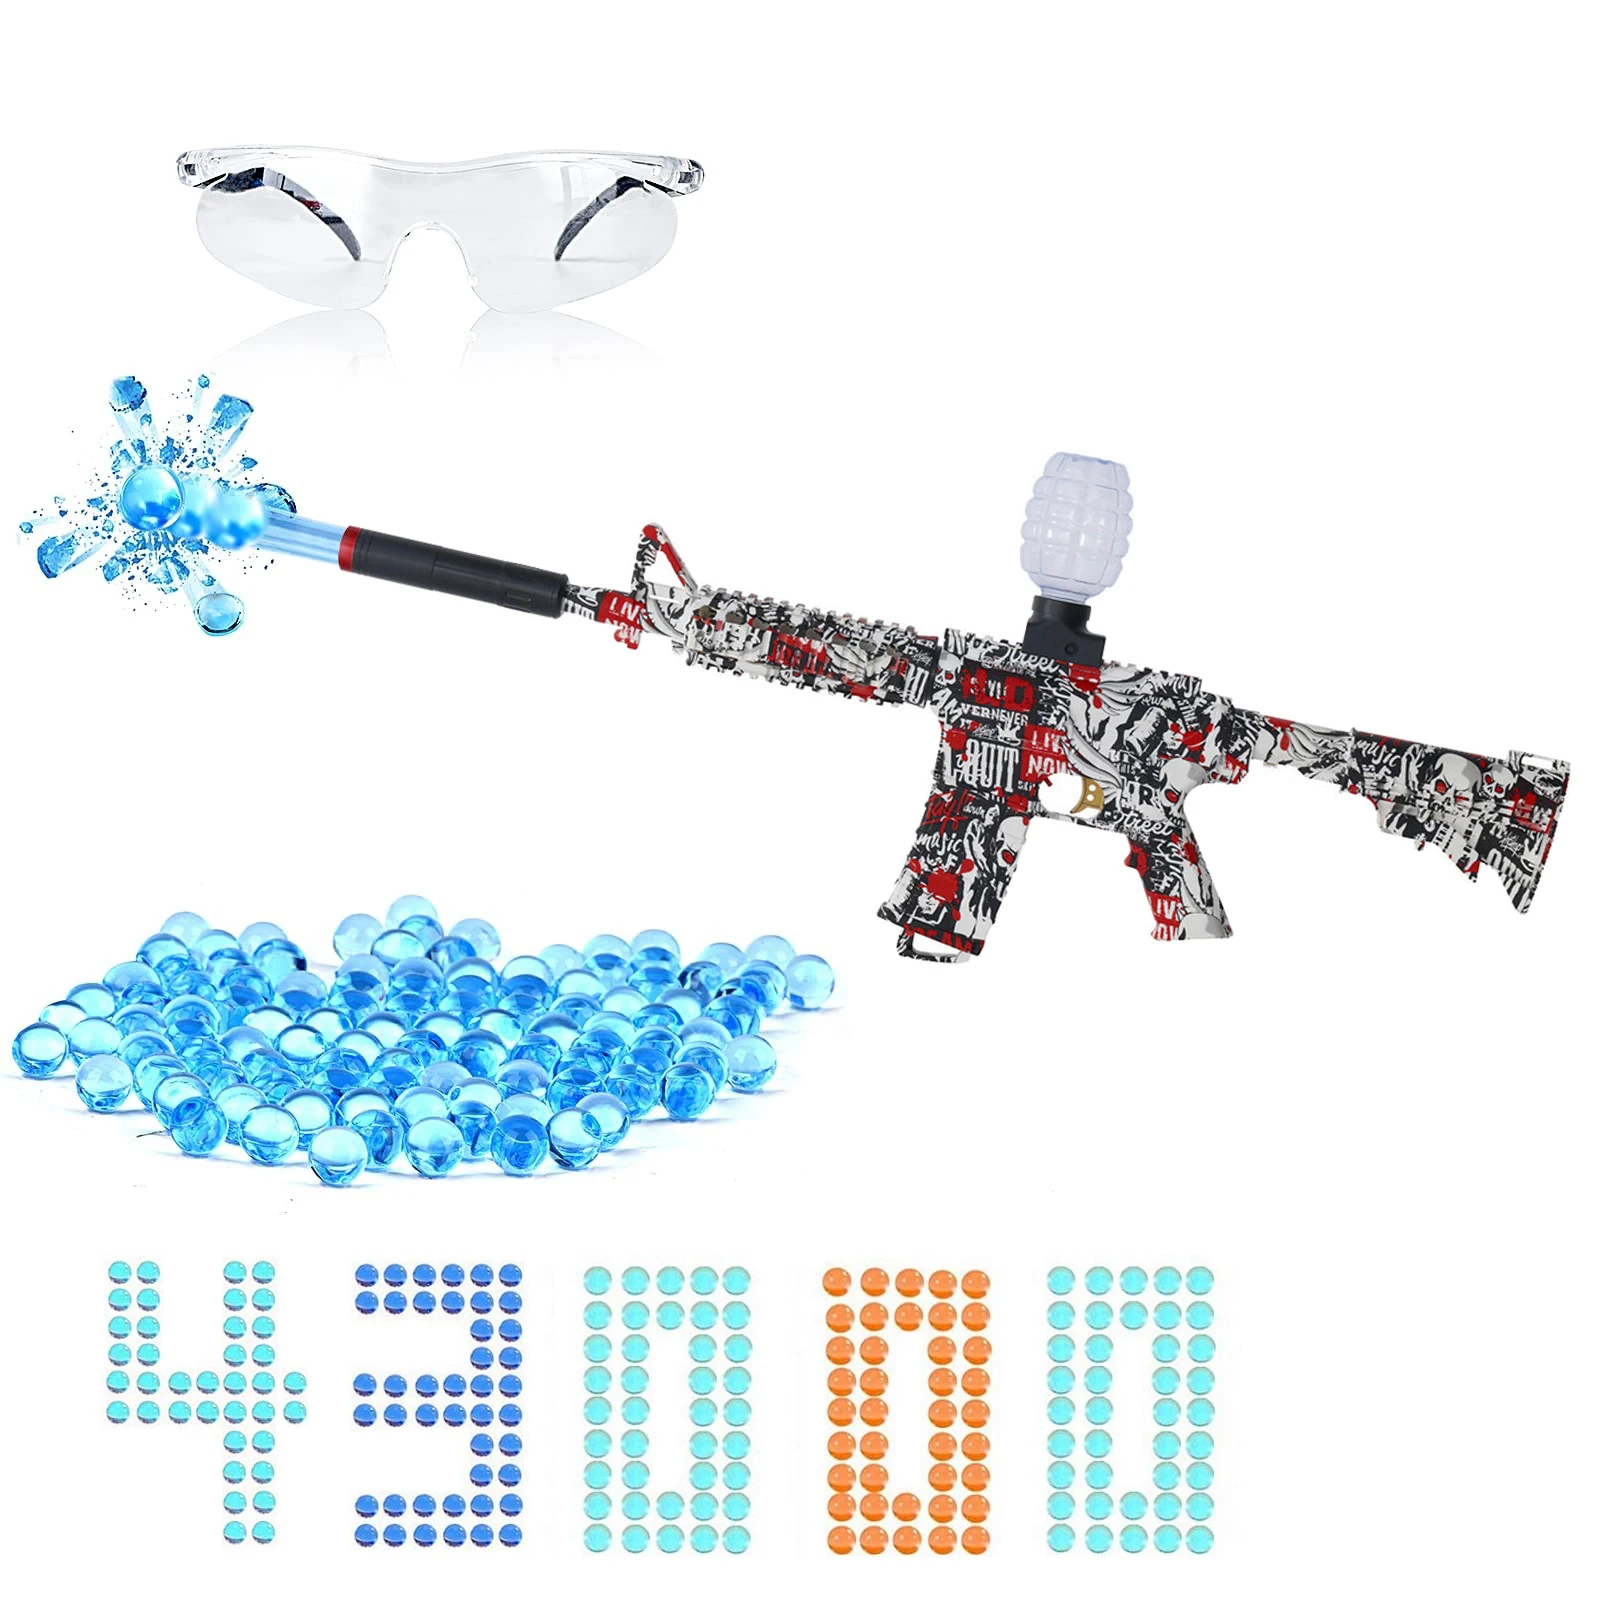 

Electric Water Ball Beads Gel Blaster Gun Toys M416 Shooter Rifle Weapon CS Fighting Outdoor Game Airsoft for Children Adult